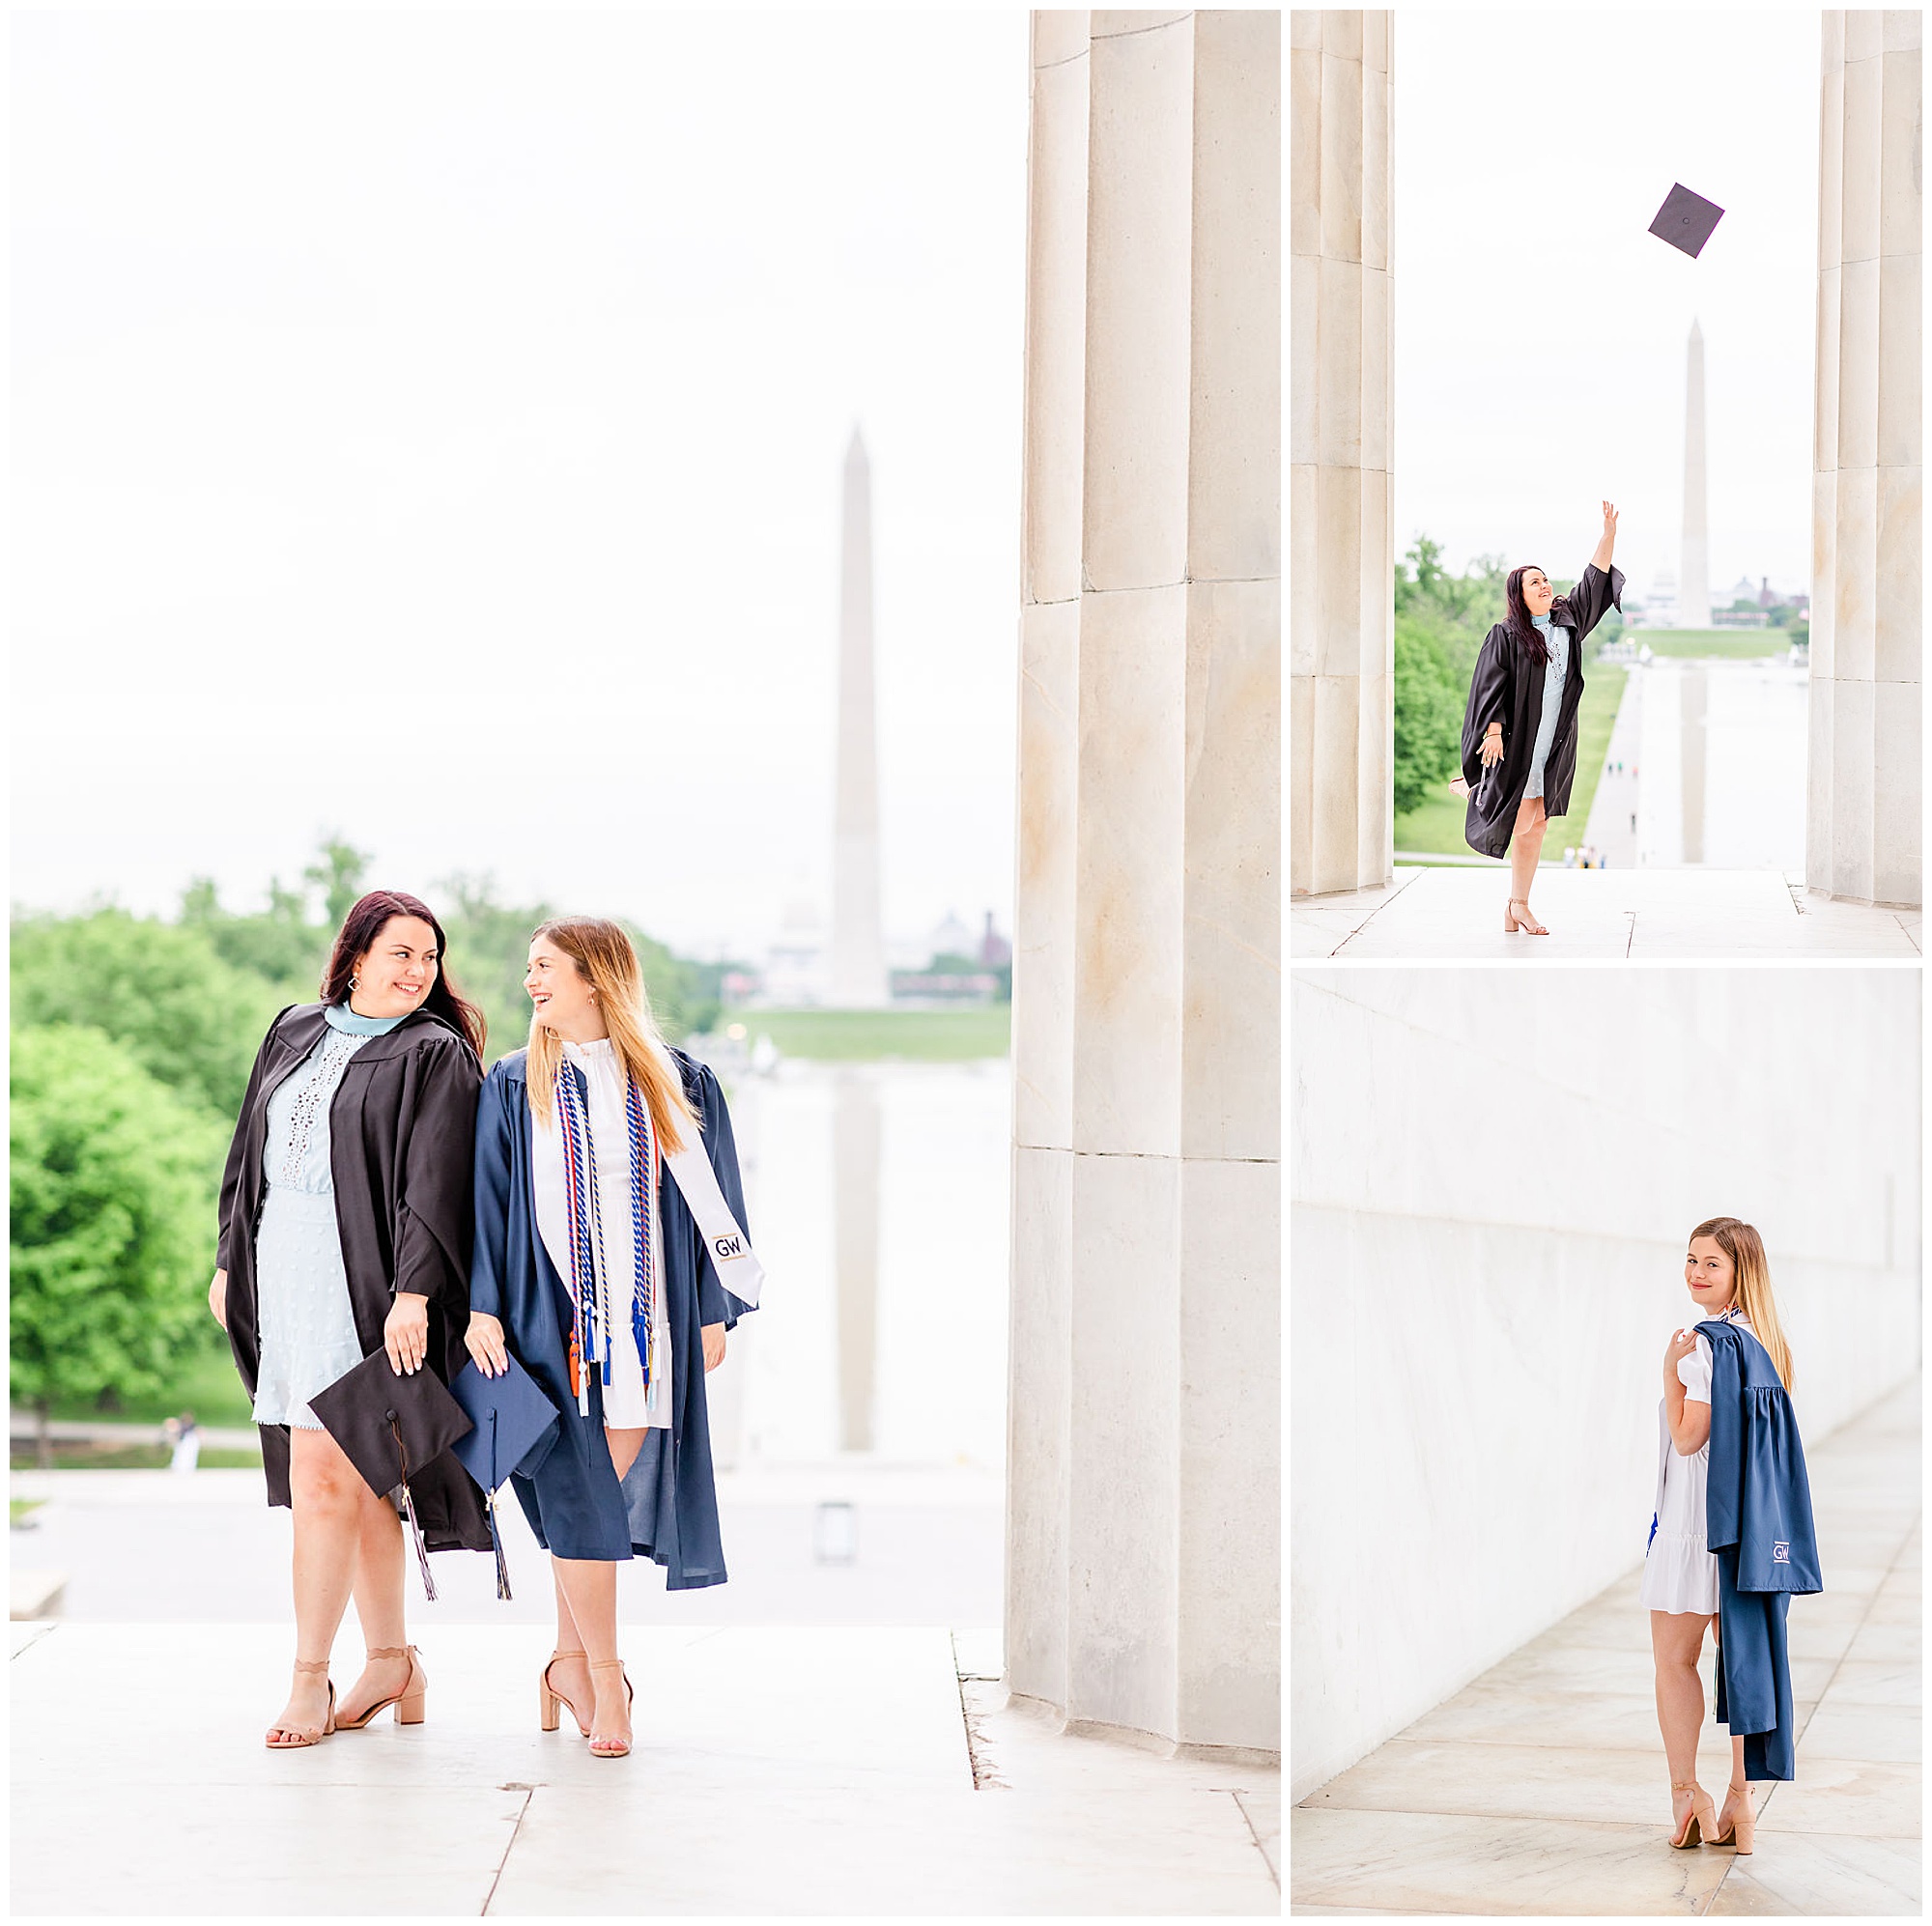 sister graduation photo session, Lincoln Memorial graduation photos, sibling graduation photos, magic hour graduation photos, Washington D.C. graduation photos, D.C graduates, Rachel E.H. Photographer, D.C. graduation photographer, sisters holding hands, sisters graduating, woman holding gown over shoulder, woman throwing cap